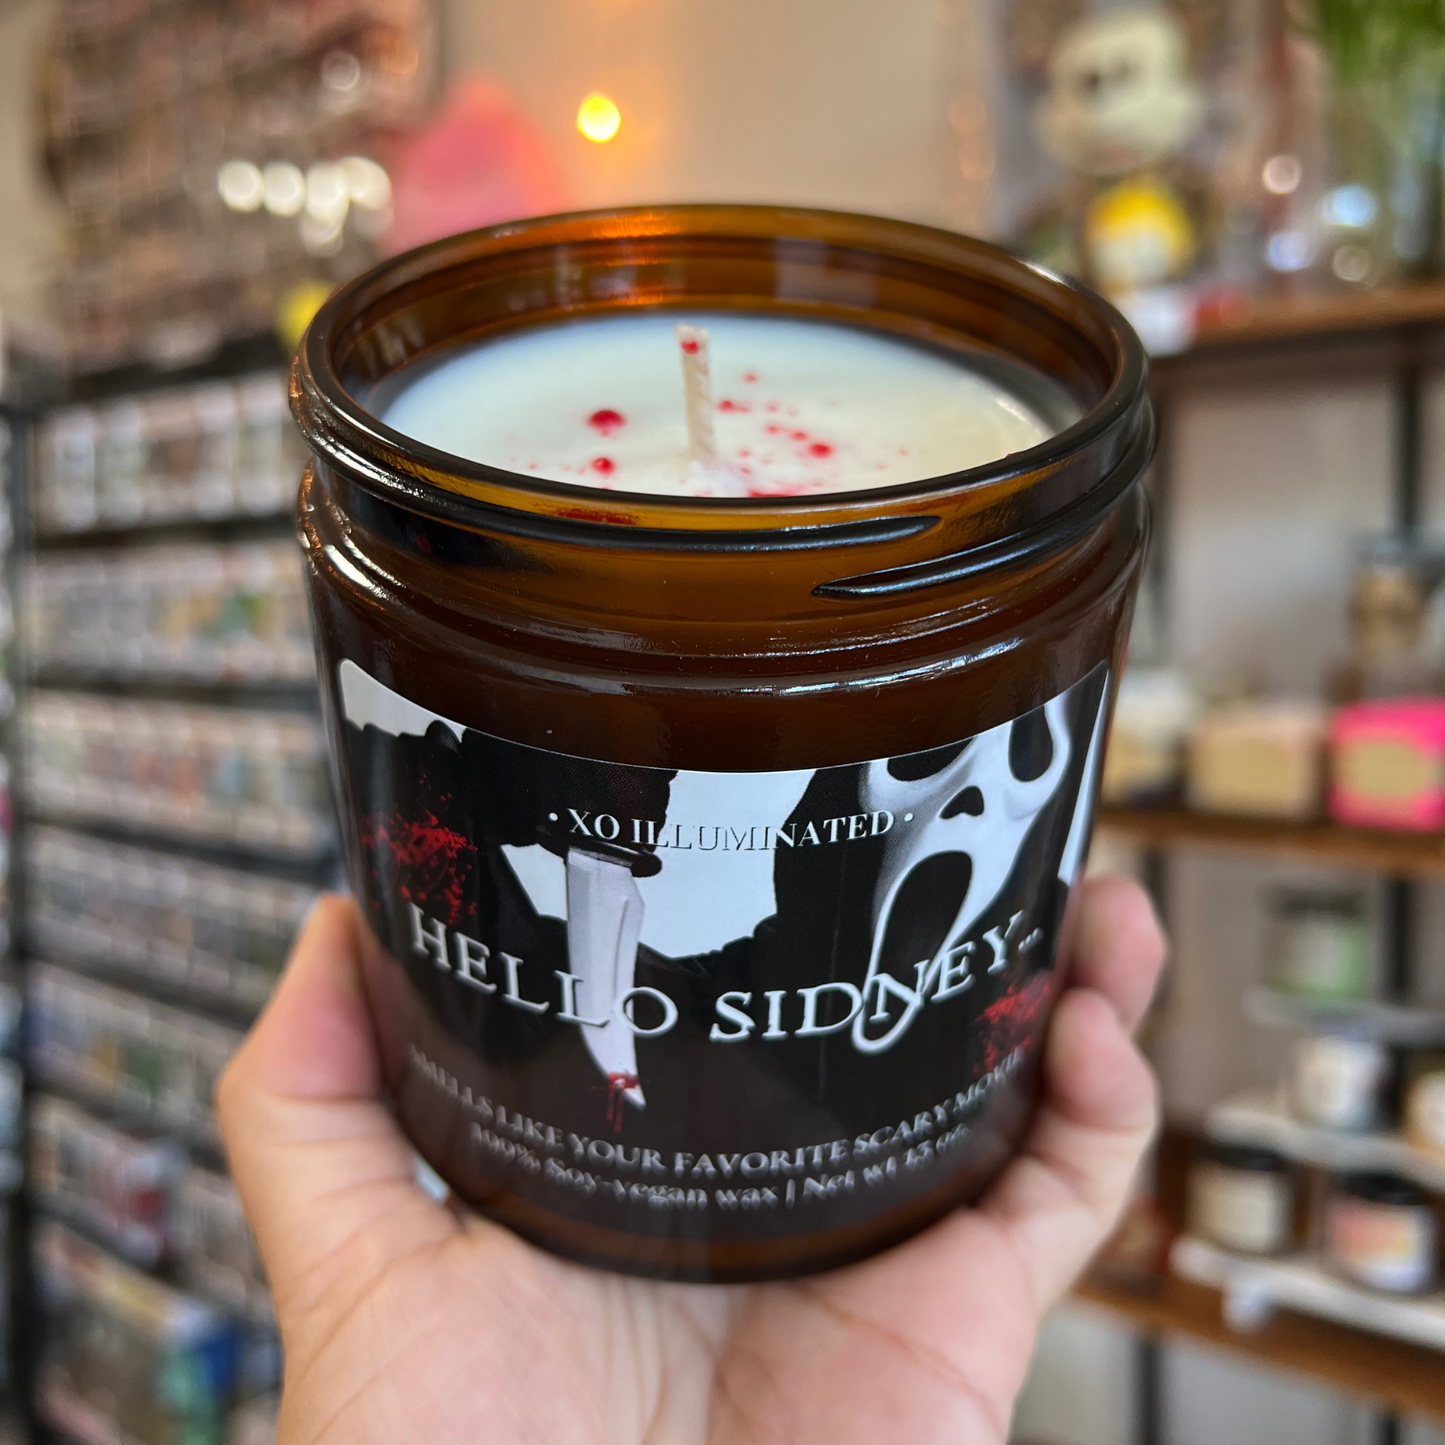 Spooktacular Hello Sidney....Candle